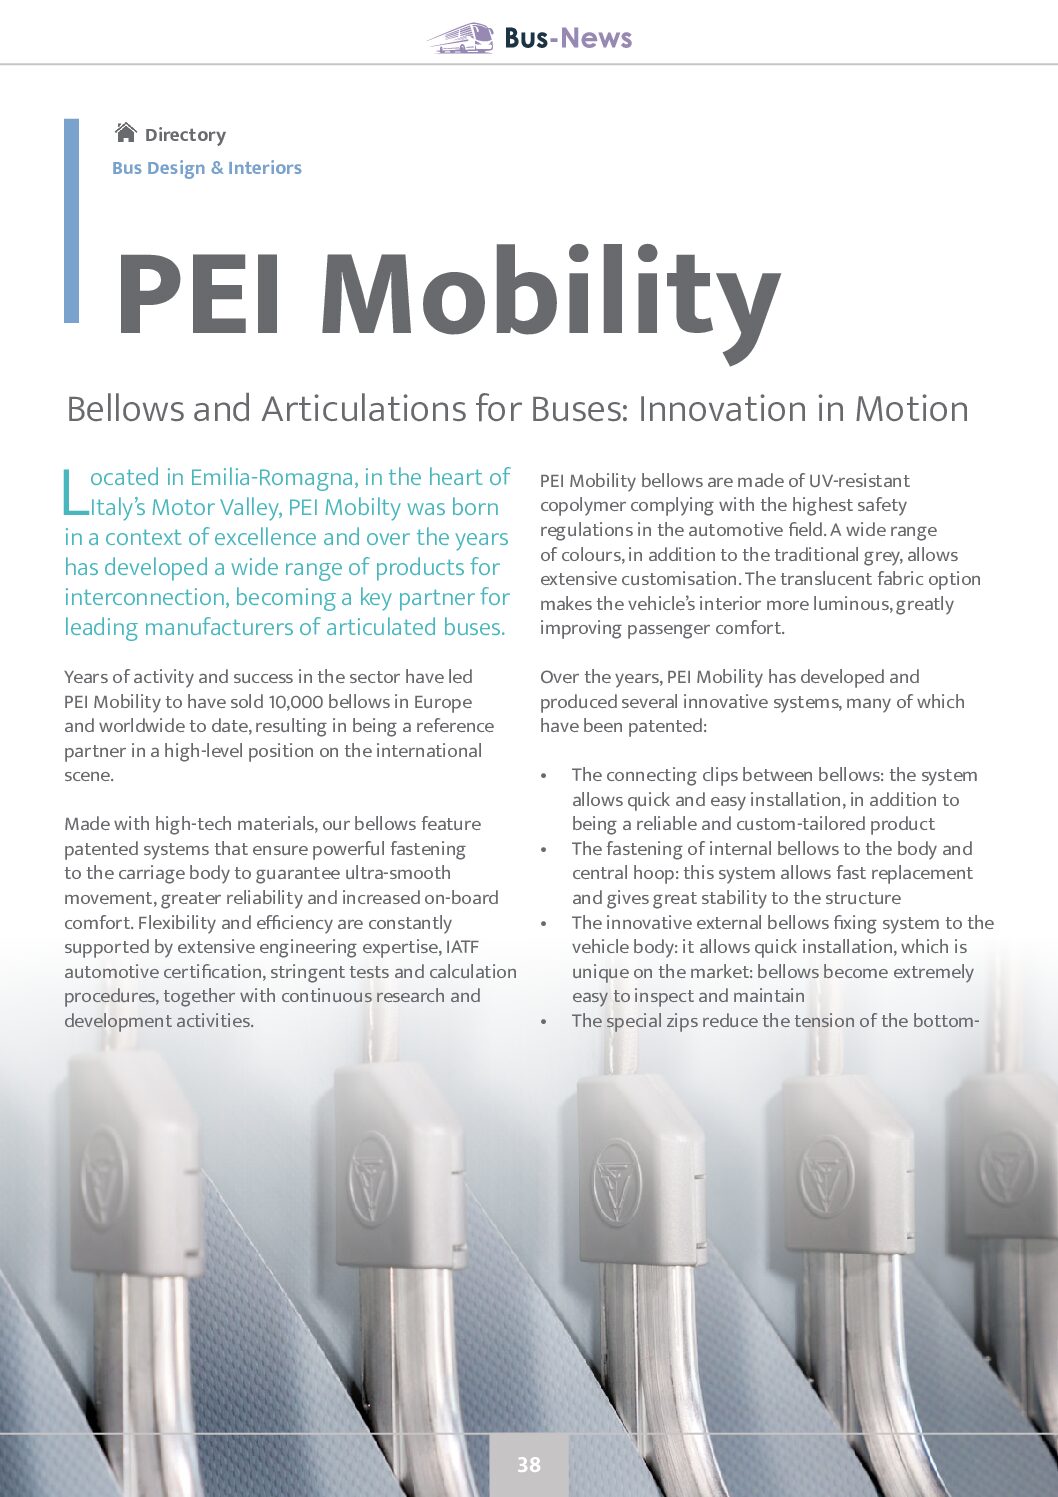 Bellows and Articulations for Buses: Innovation in Motion